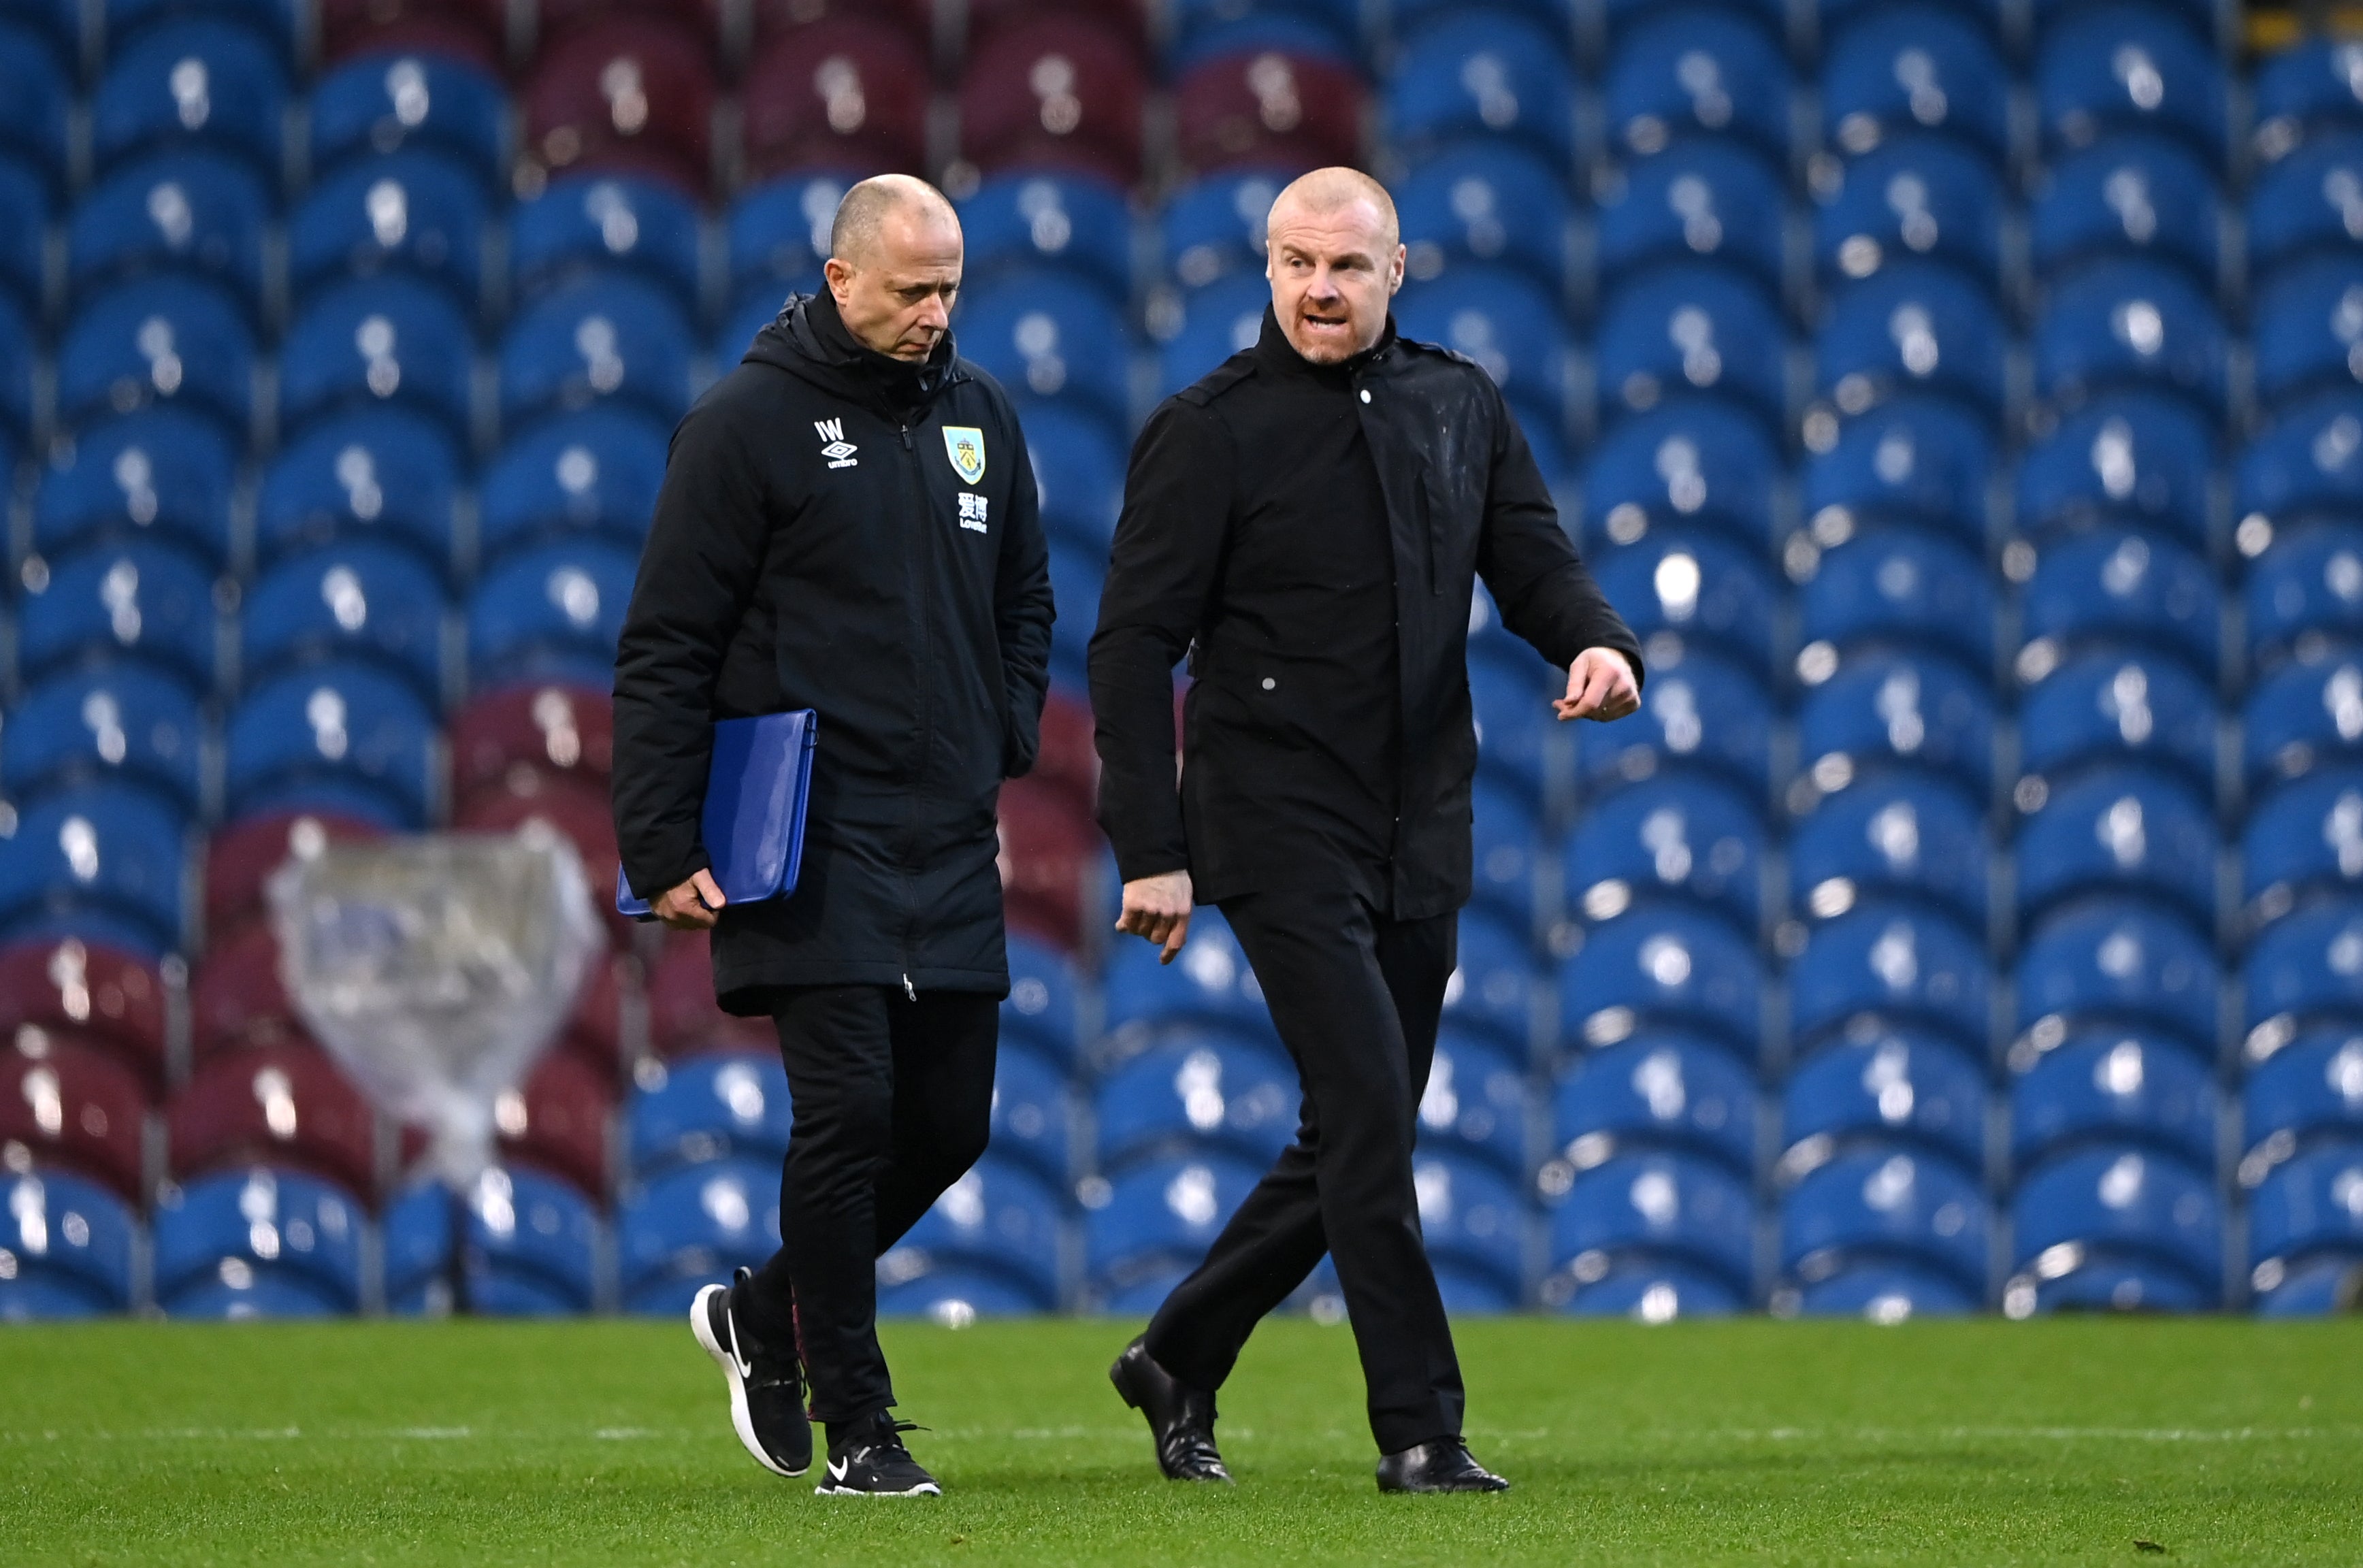 The Clarets take on second-tier side Huddersfield in the third round